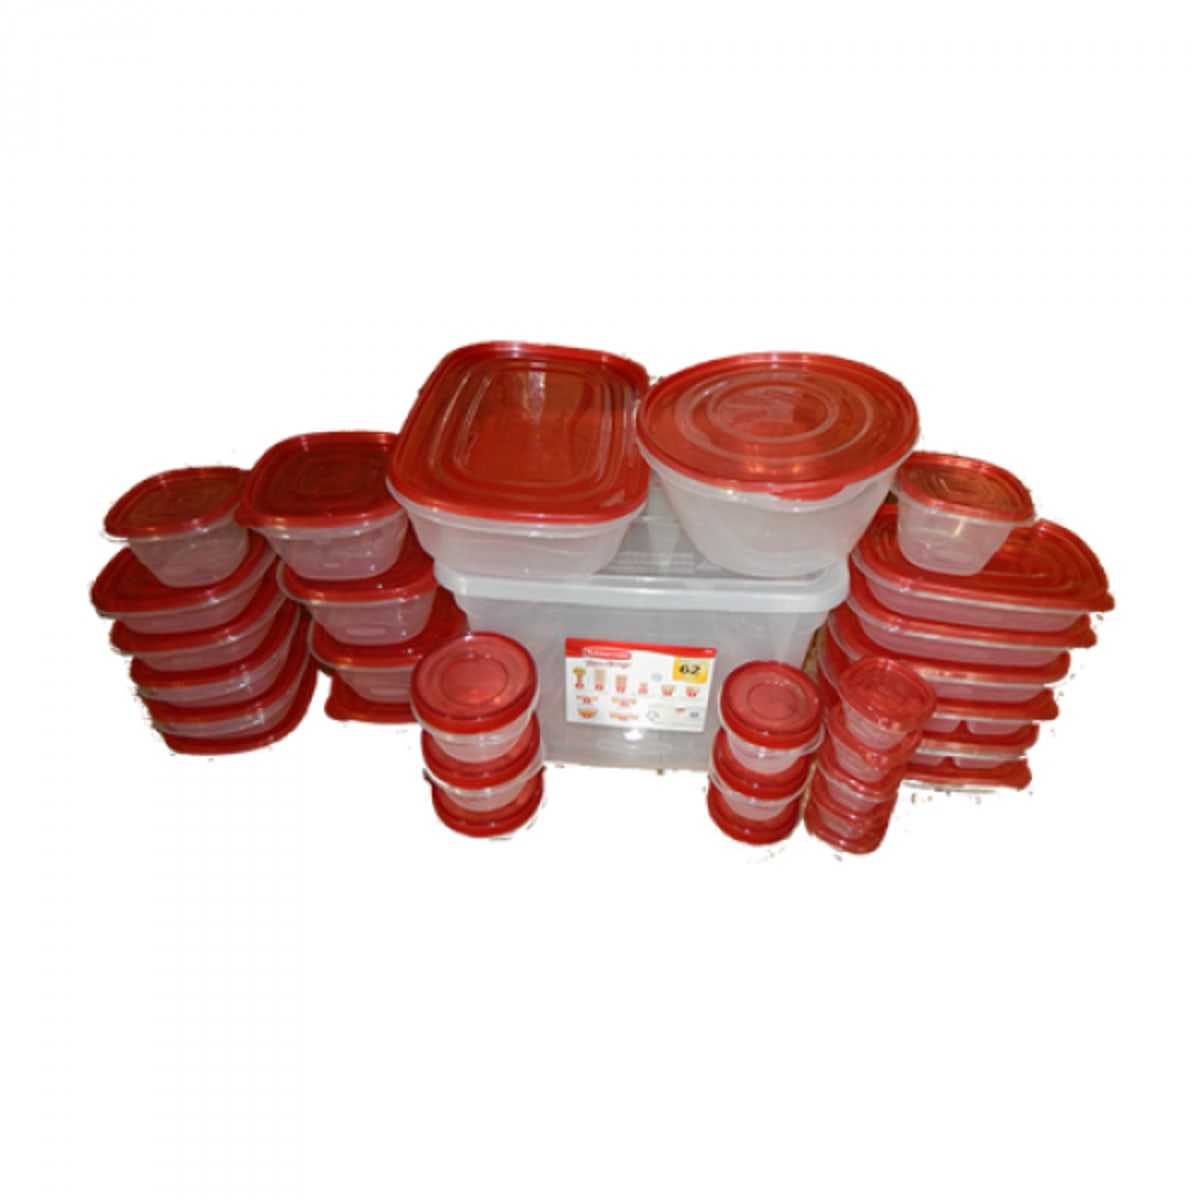 Rubbermaid TakeAlongs 62-Pc. Food Container Set Including Lids